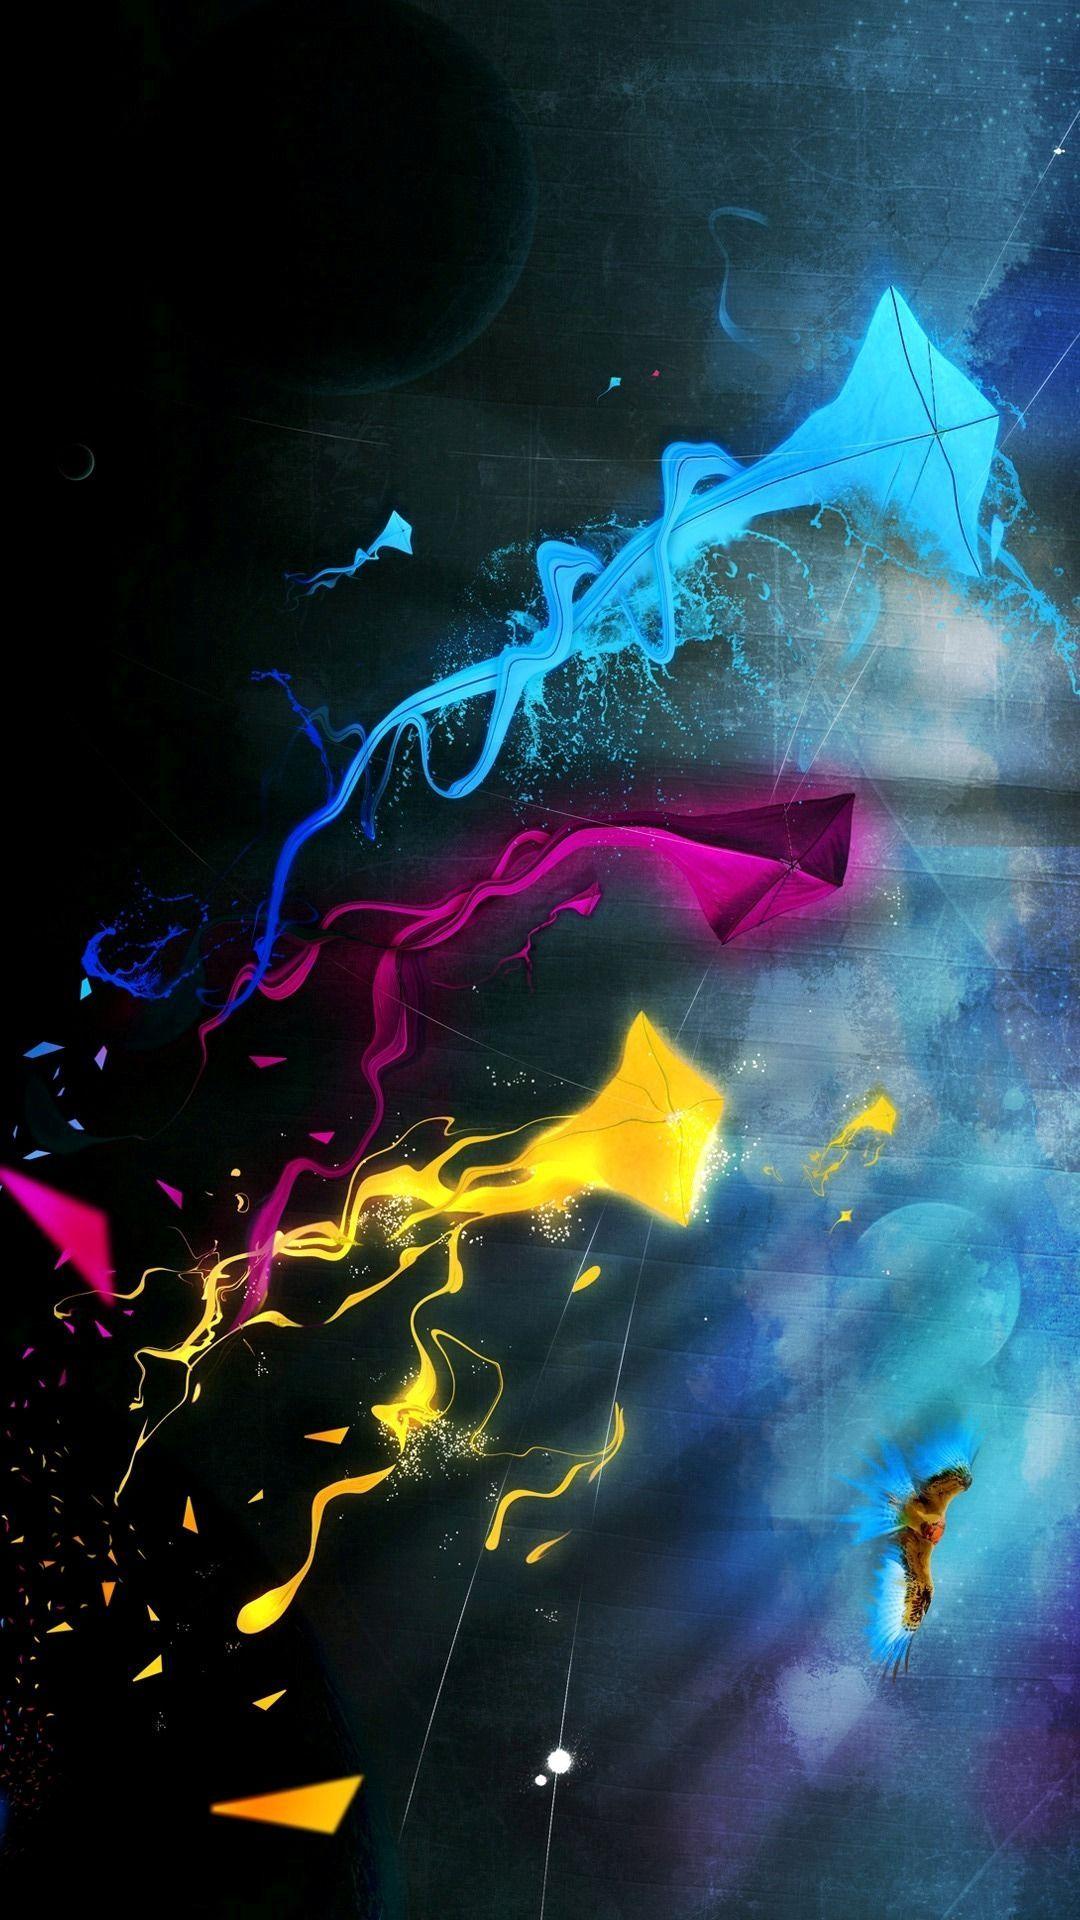 New Mobile Wallpaper Find best latest New Mobile Wallpaper